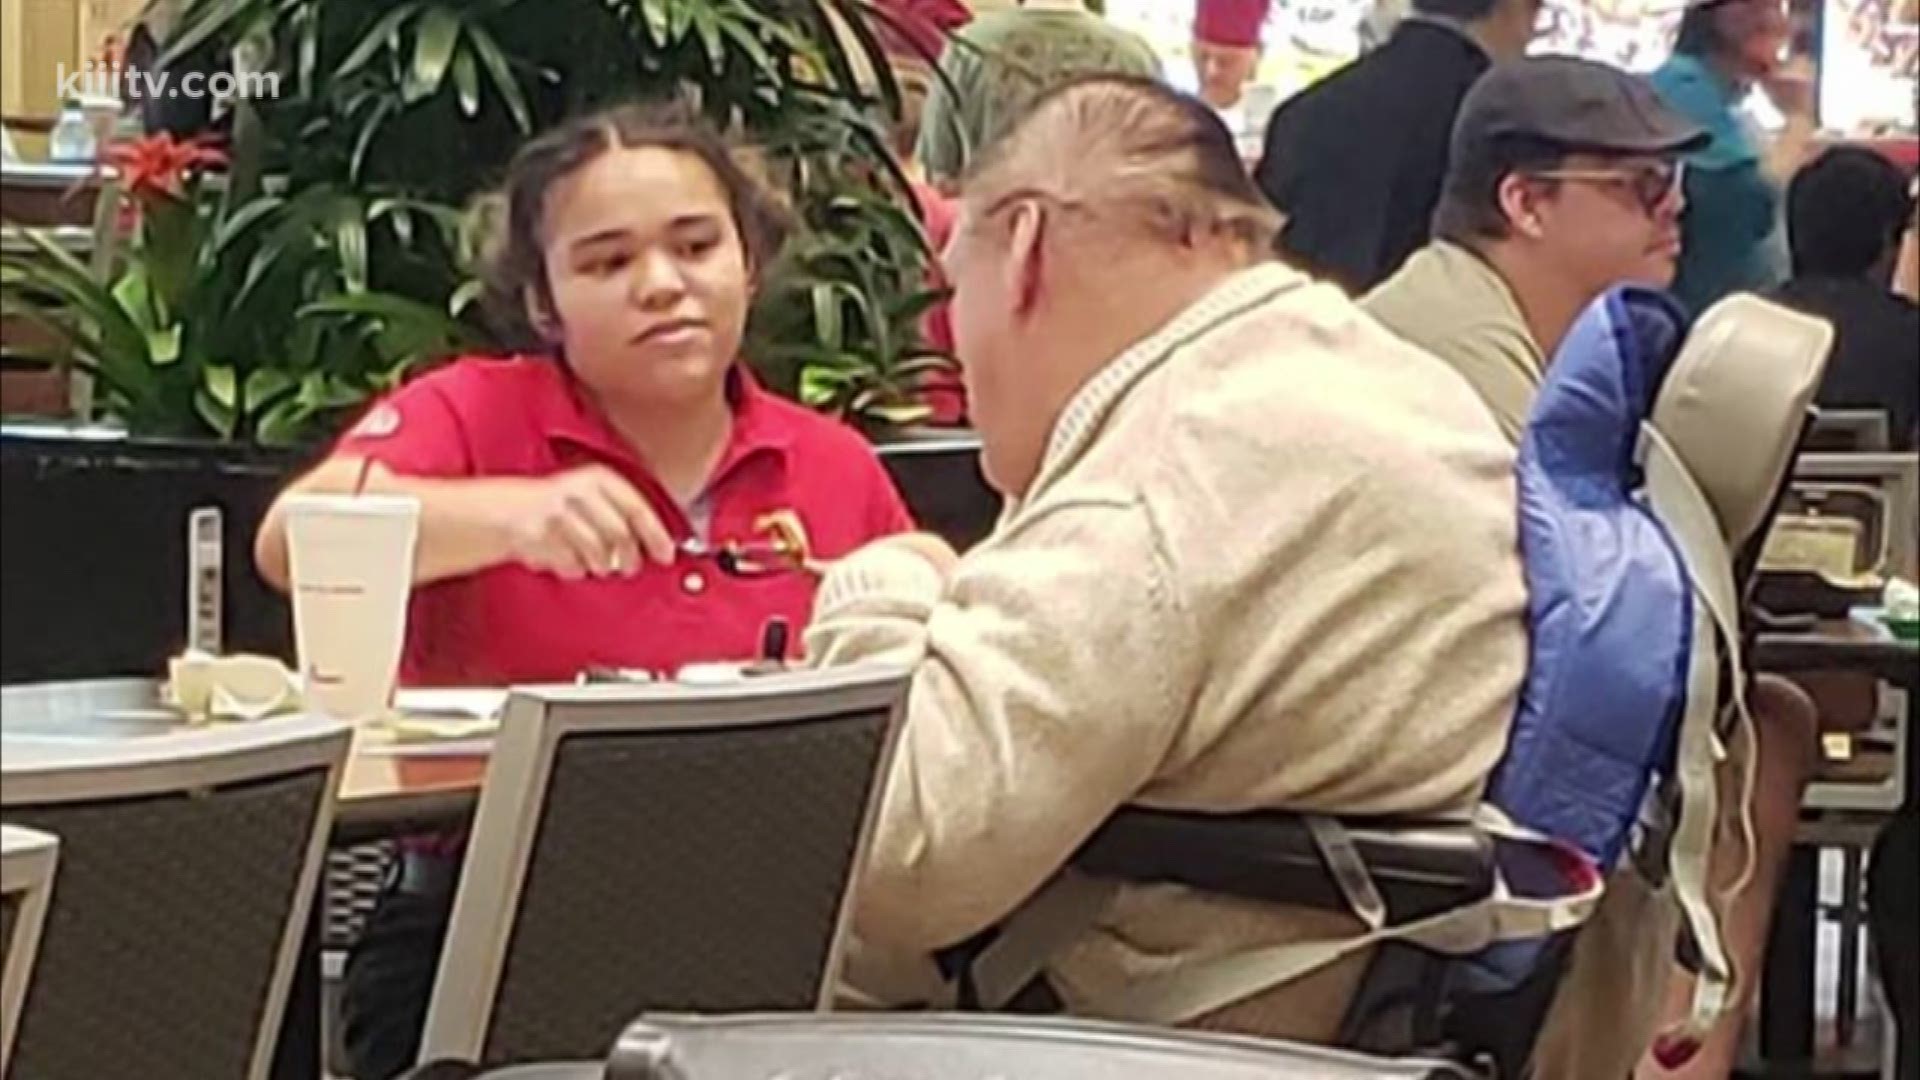 Ashley Guzman was well into her six-hour work day at a Chick-fil-A in Corpus Christi, Texas, when a frequent customer who is disabled show up for his meal.